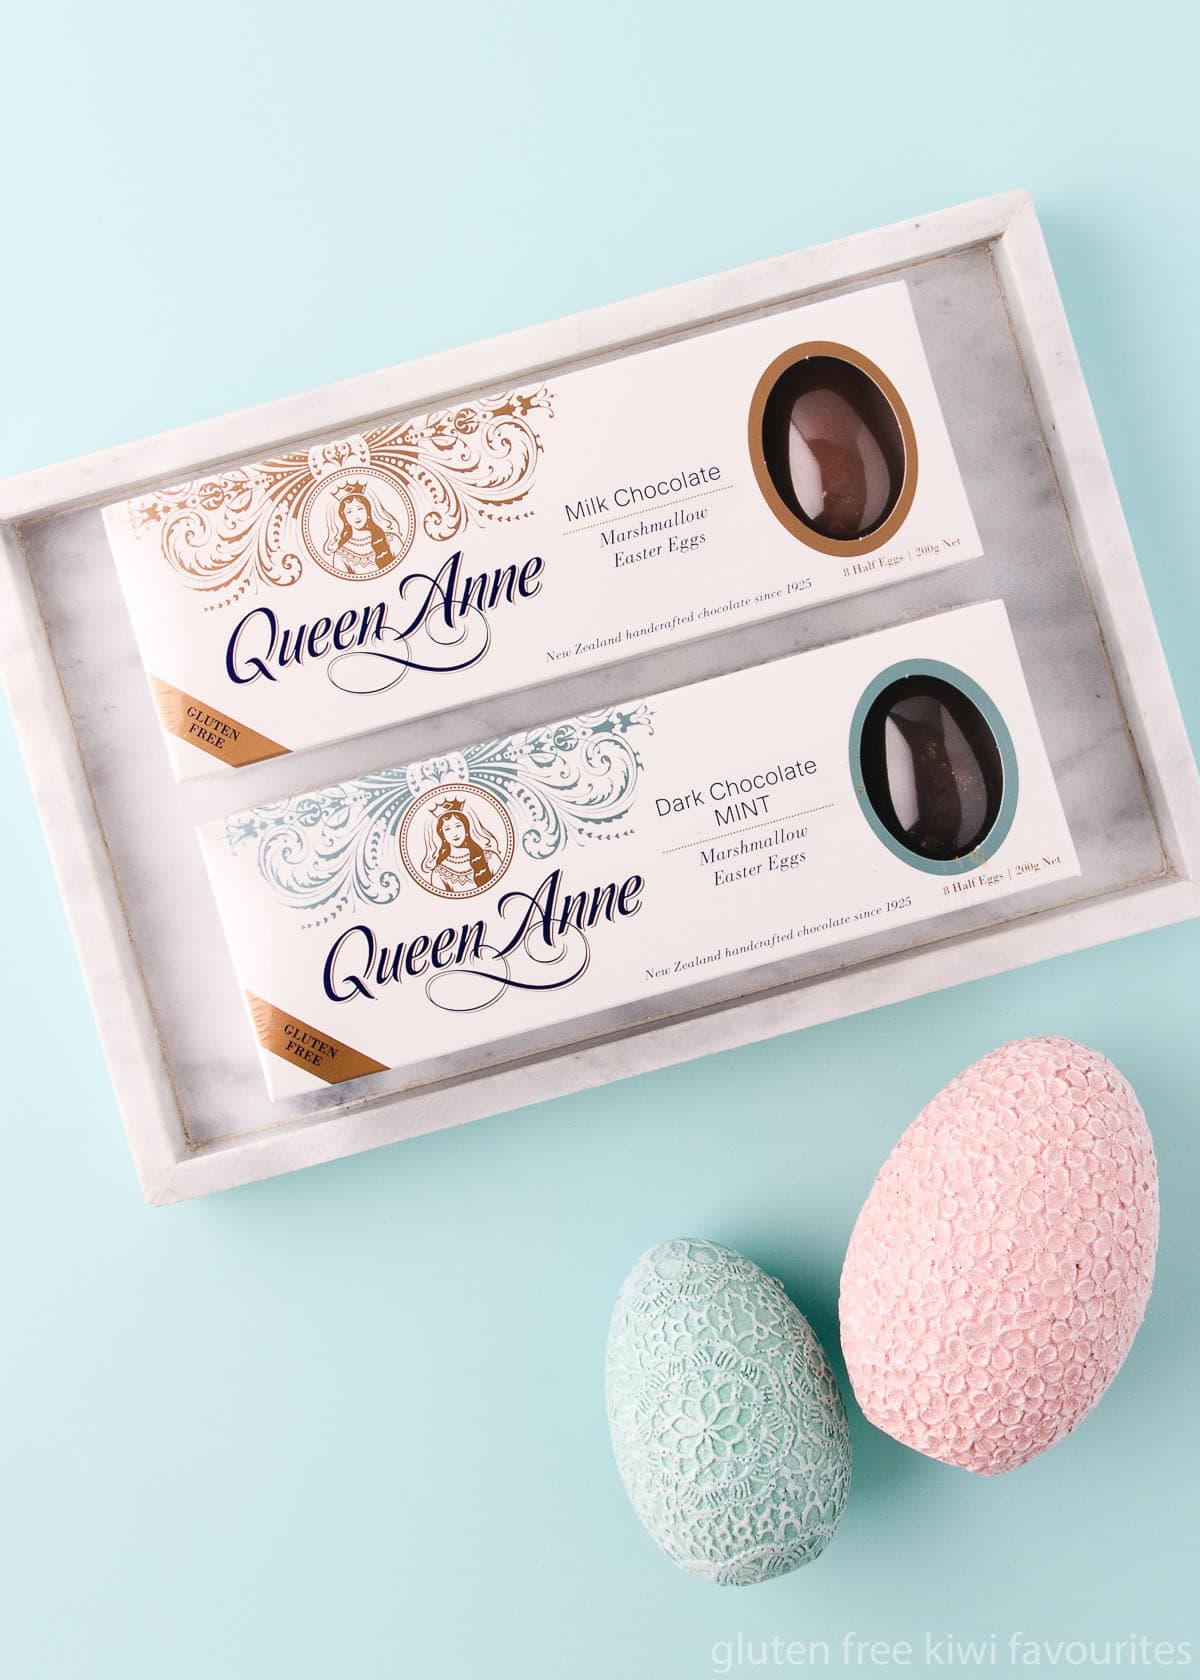 A box of gluten free Queen Anne milk chocolate marshmallow eggs and dark chocolate mint marshmallow eggs in a marble tray on a mint green background.